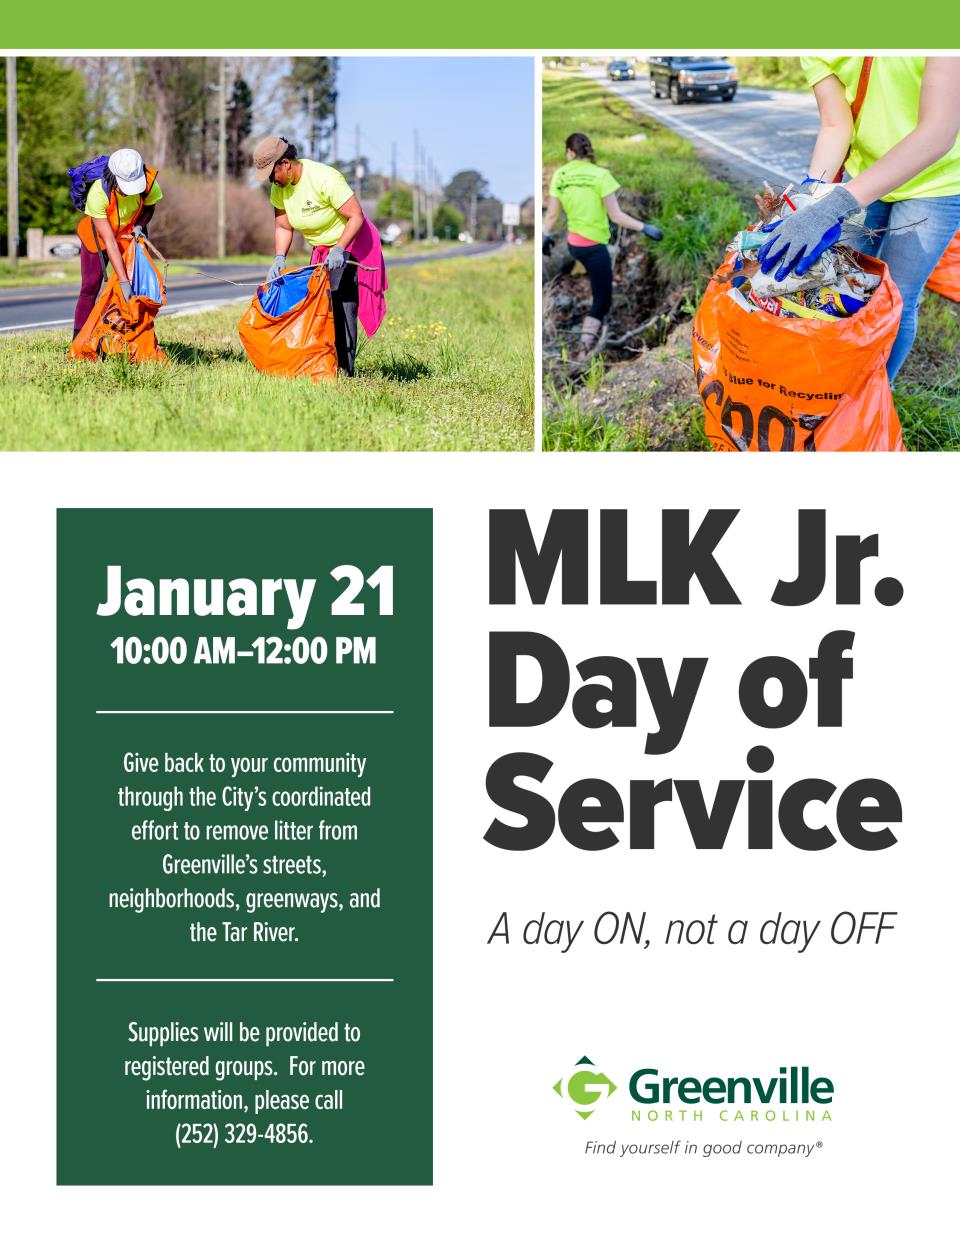 2019 Day of Service